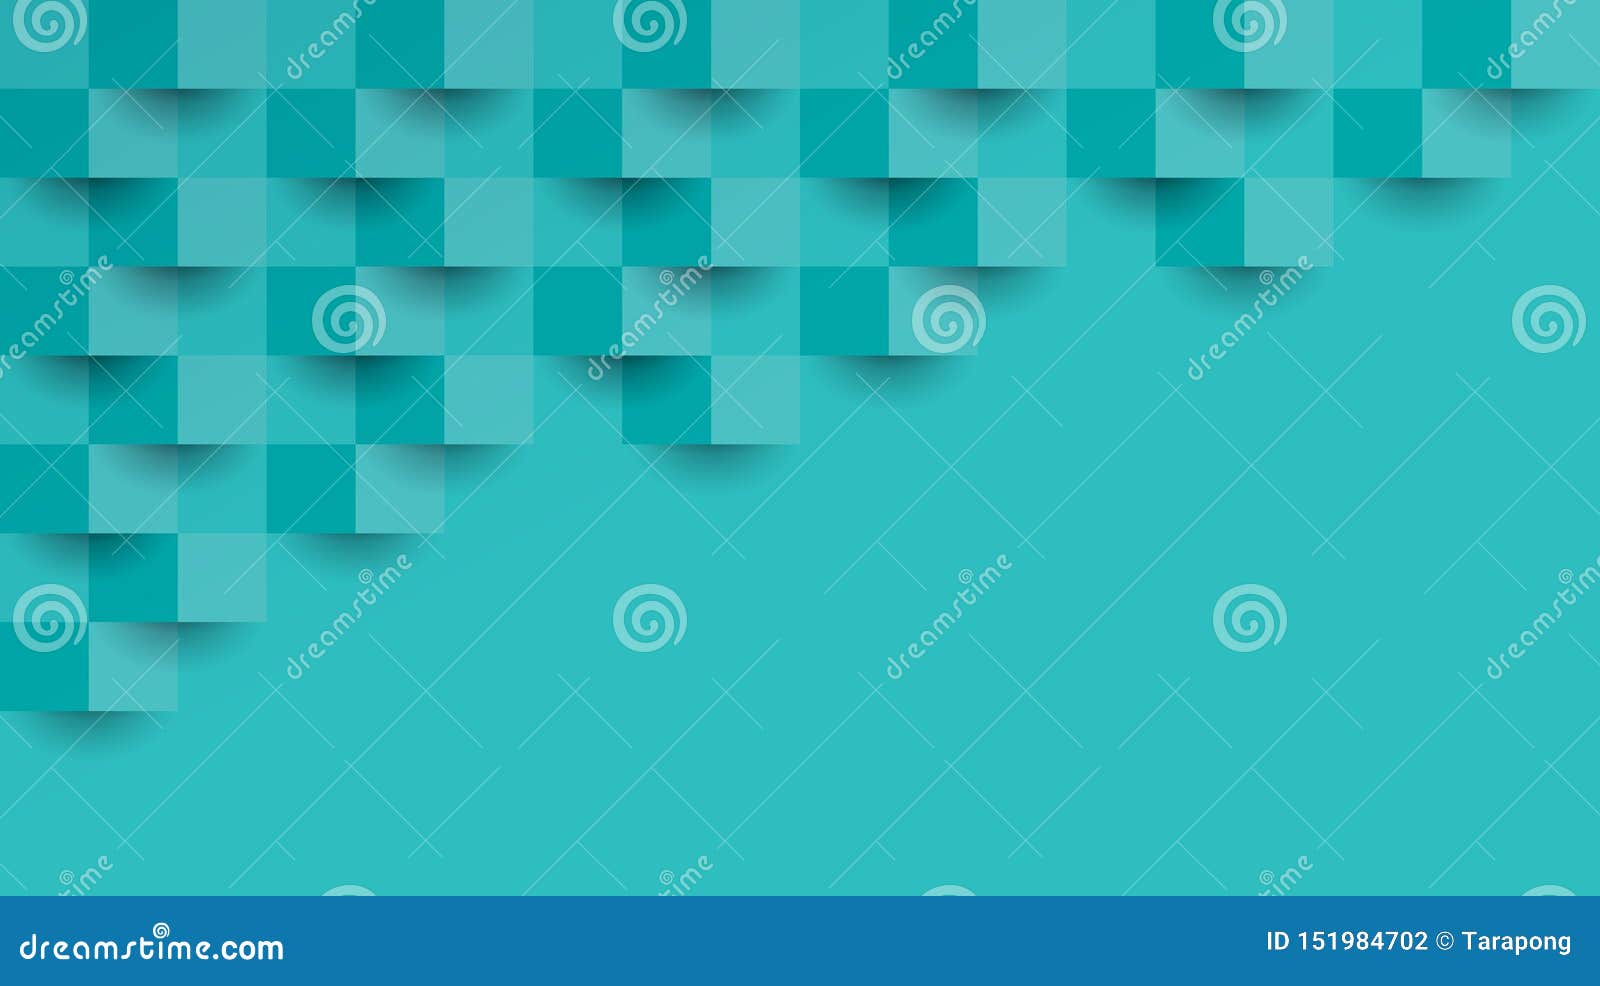 Blue Green Abstract Texture. Vector Background Can Be Used in Cover Design,  Book Design, Poster, Cd Cover, Website Backgrounds. Stock Vector -  Illustration of cover, book: 151984702